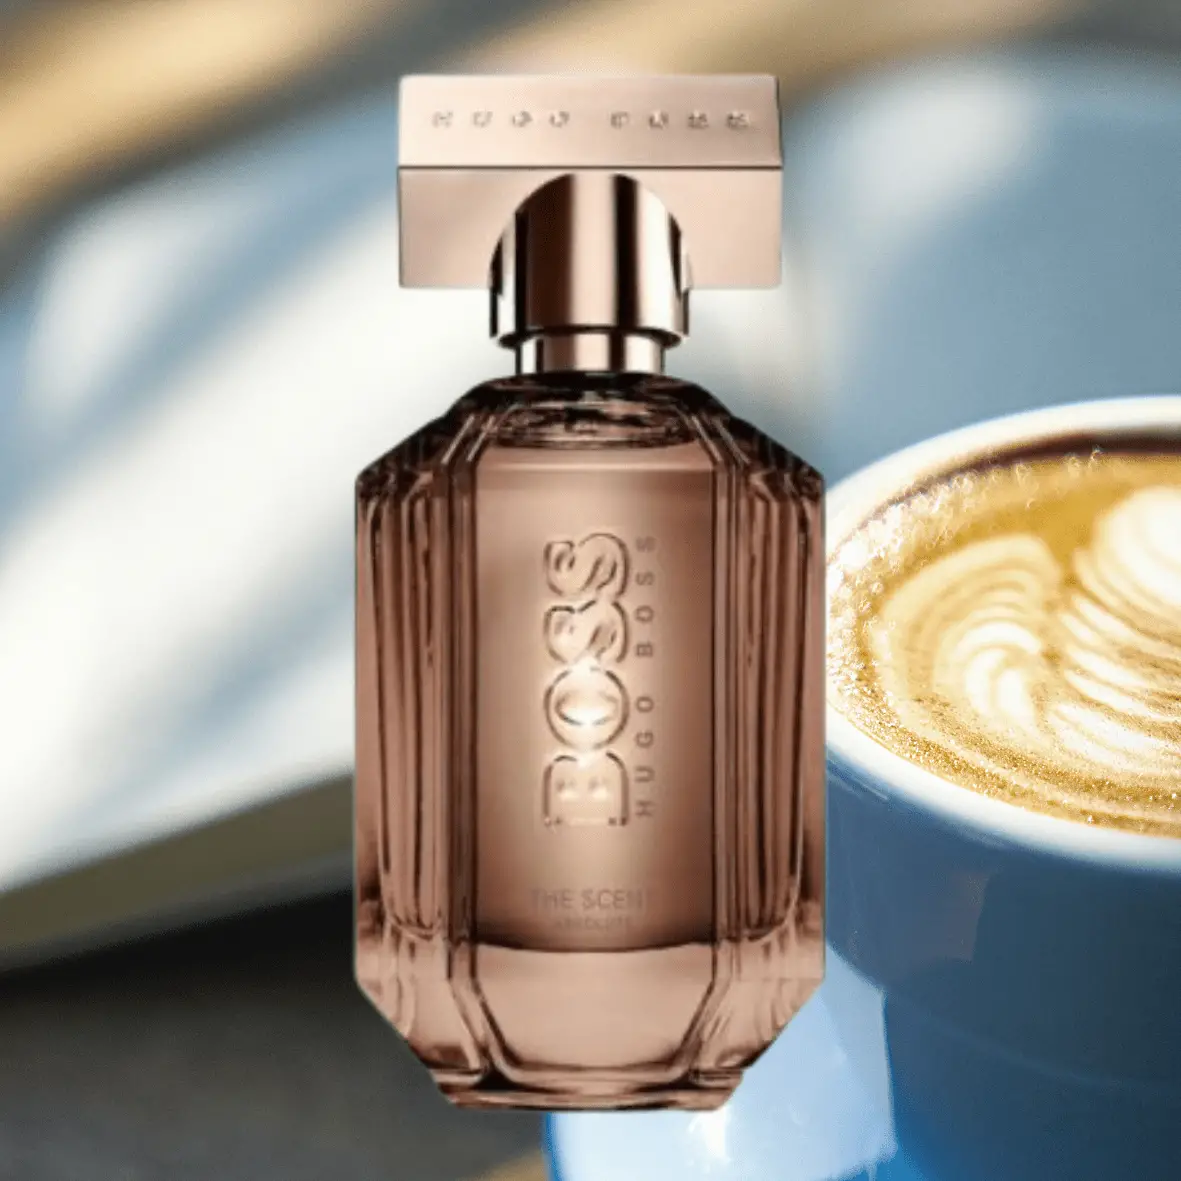 Hugo Boss The Scent Absolute For Her
Best Coffee Perfumes